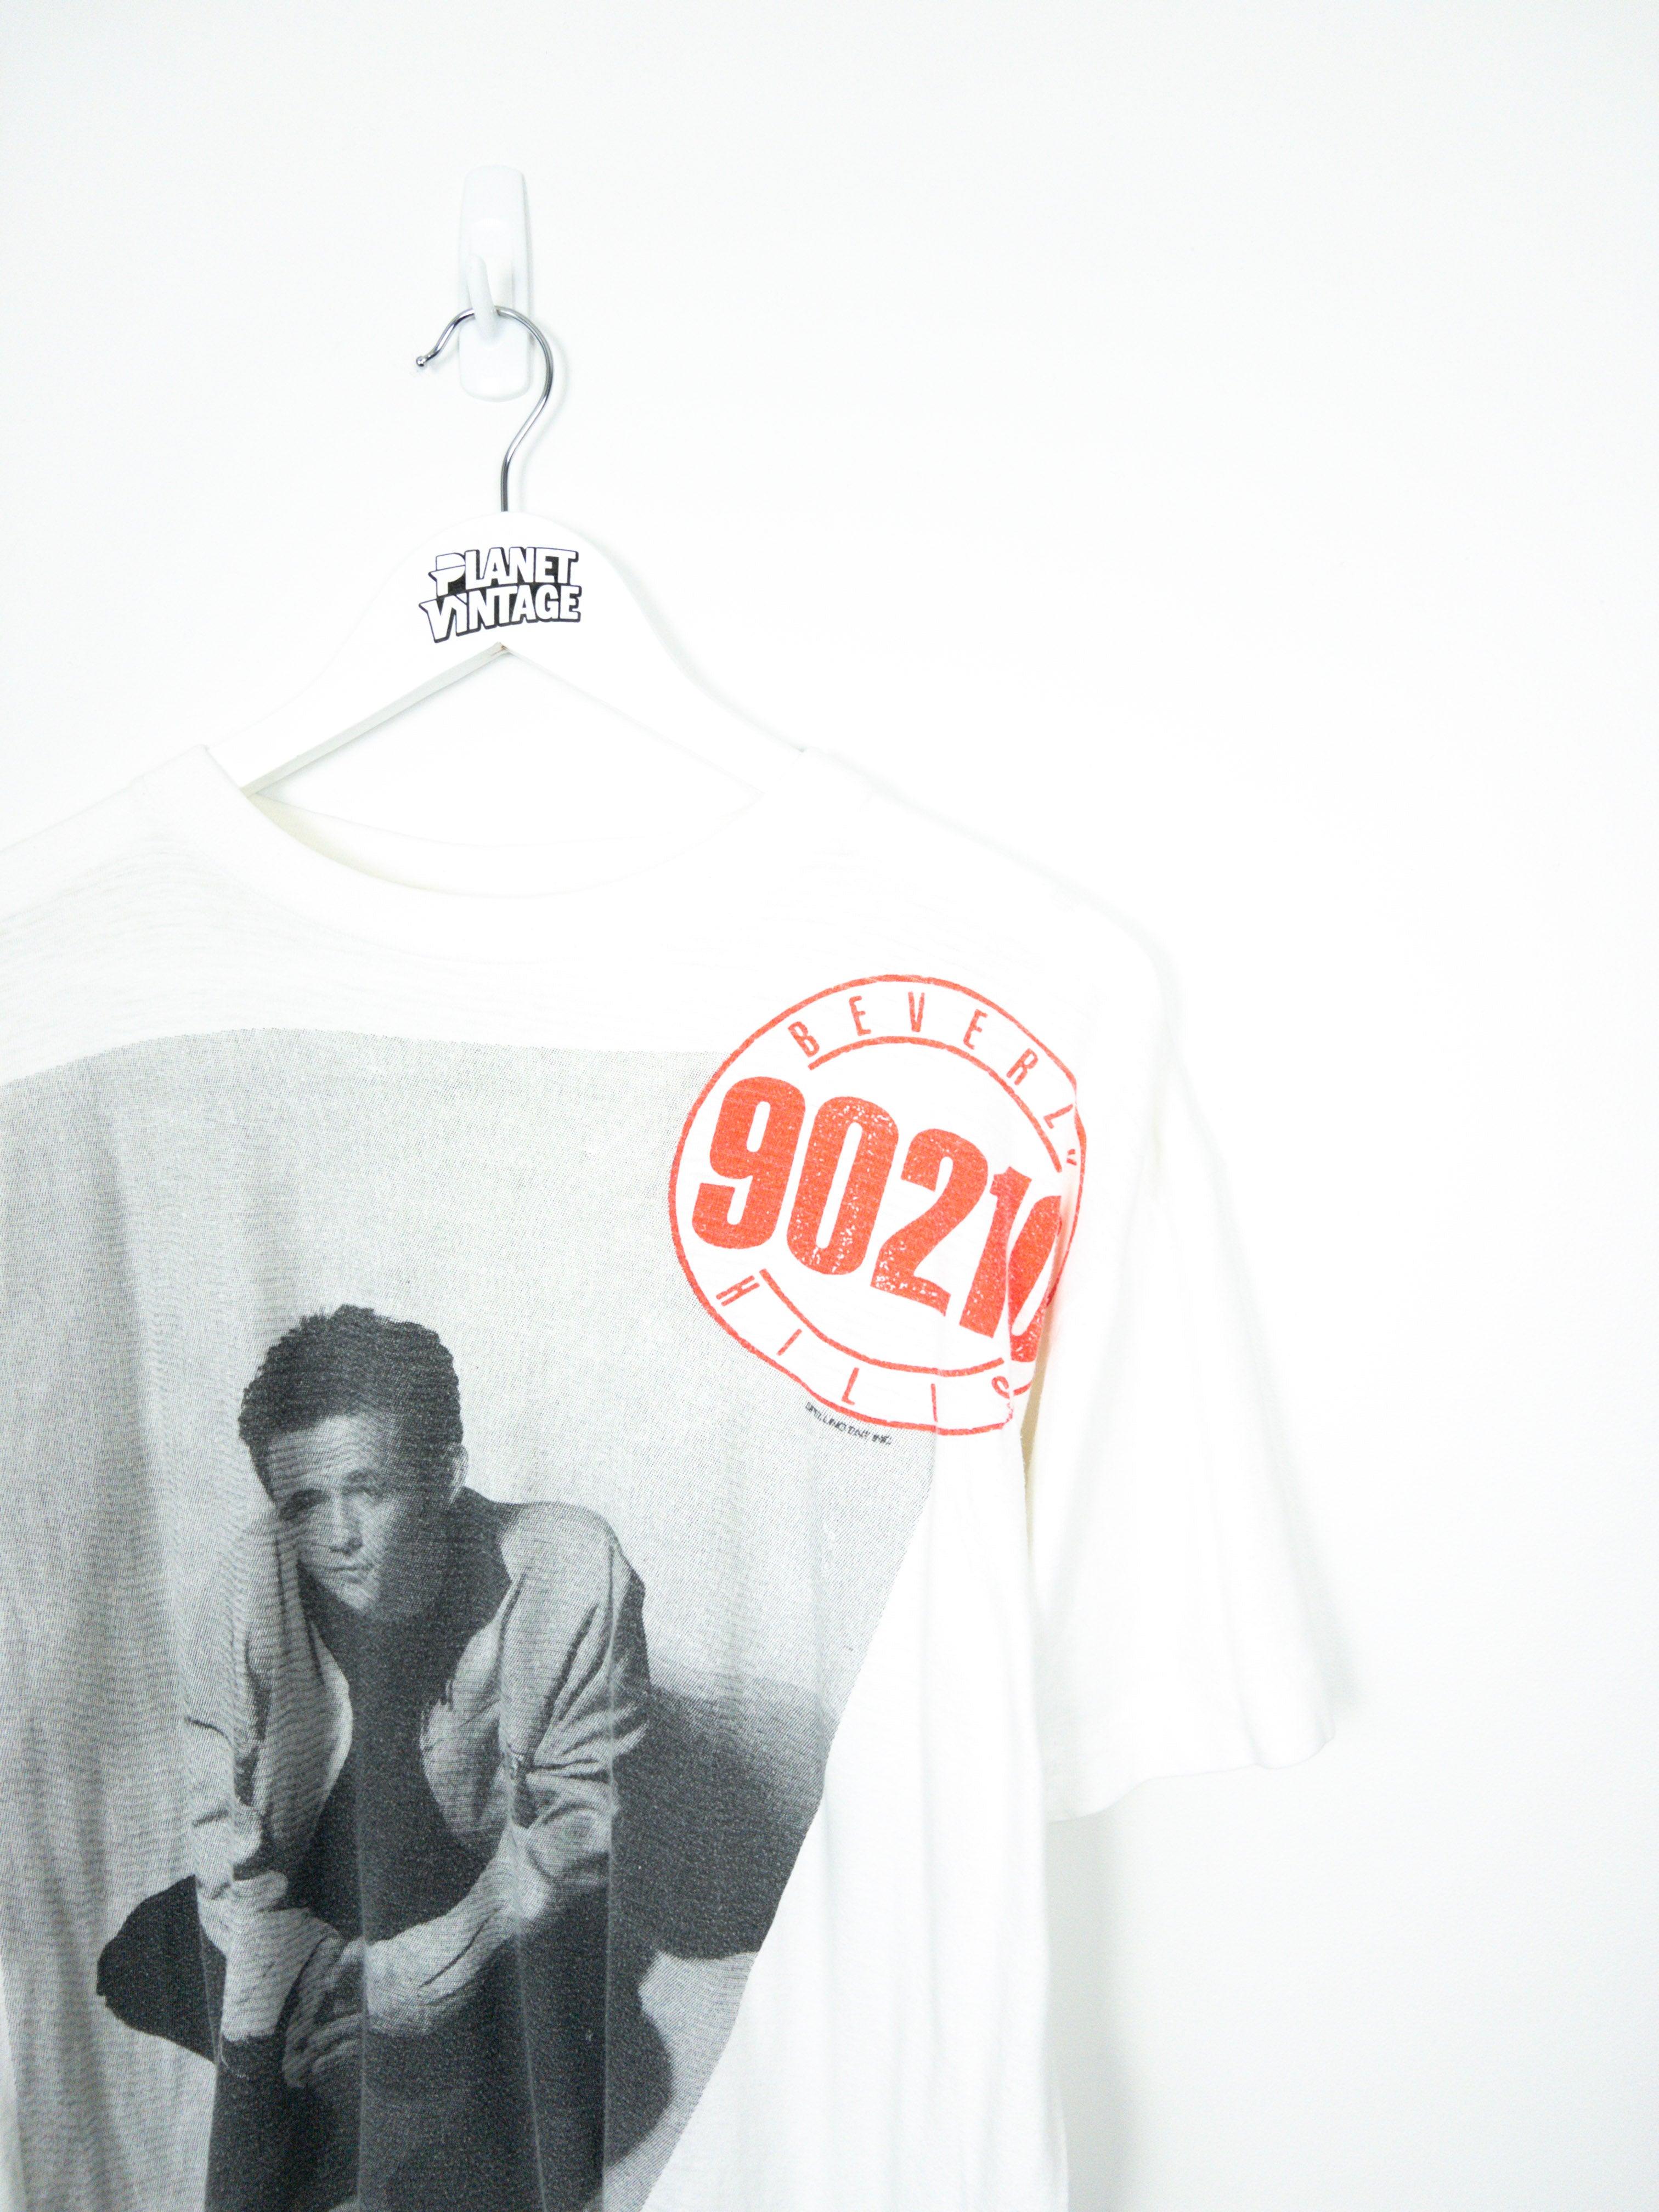 Beverly Hills 90210 Luke Perry '90s Tee (S) - Planet Vintage Store